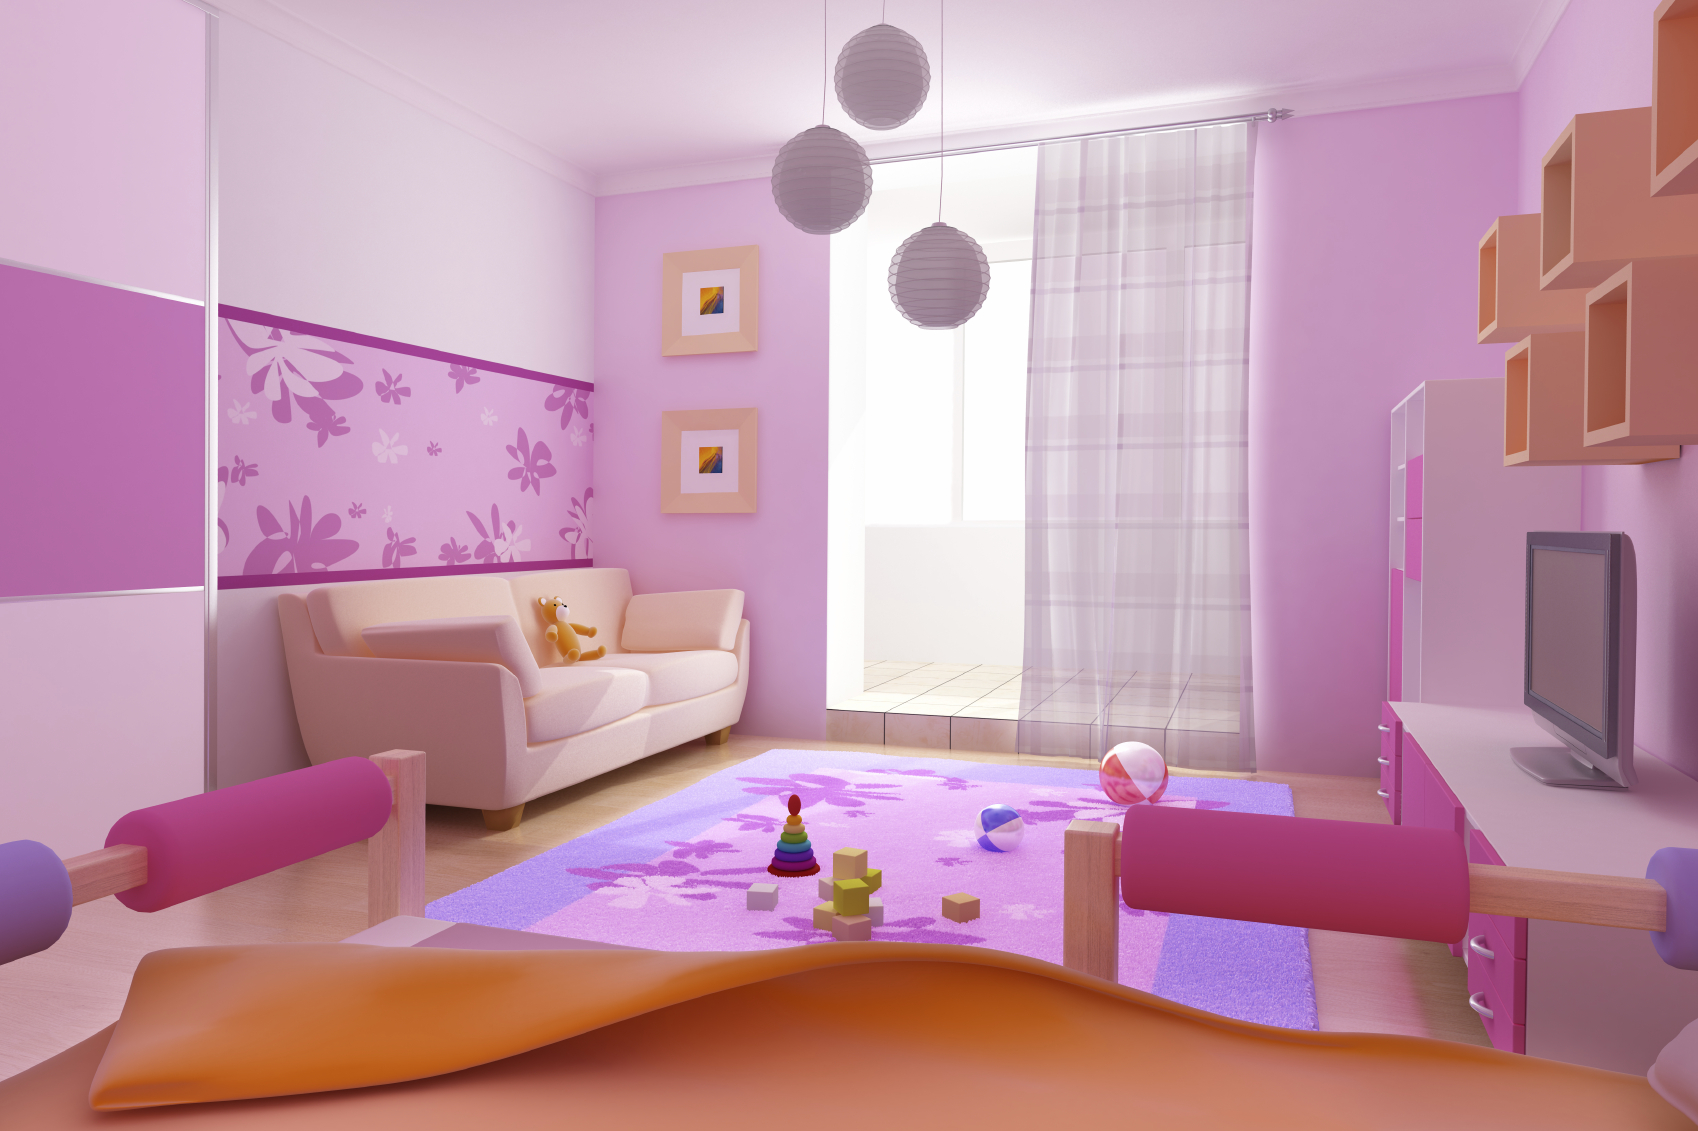 We choose bright photo wallpapers for the children's room